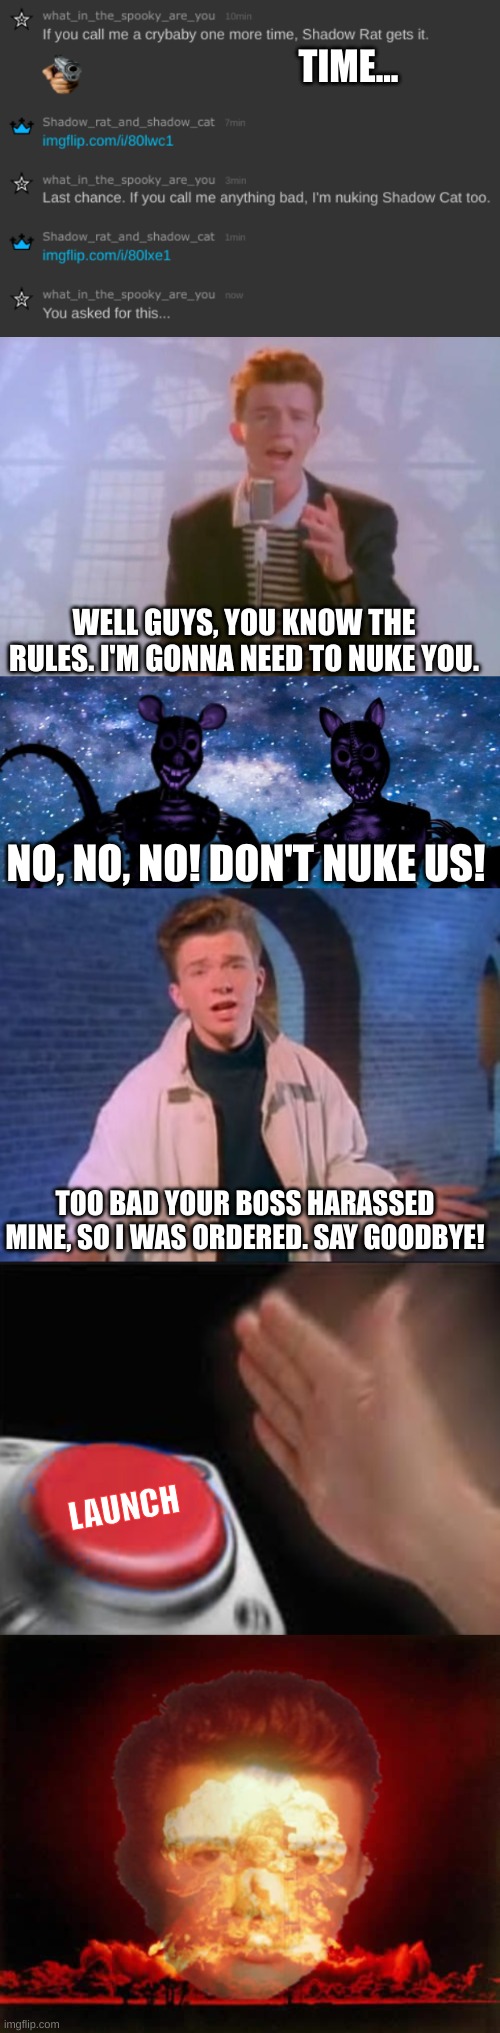 TIME... WELL GUYS, YOU KNOW THE RULES. I'M GONNA NEED TO NUKE YOU. NO, NO, NO! DON'T NUKE US! TOO BAD YOUR BOSS HARASSED MINE, SO I WAS ORDERED. SAY GOODBYE! LAUNCH | image tagged in rick astley,shadow rat and cat announcement page,rick astley never gonna let you down,i choose you,memes,nuclear explosion | made w/ Imgflip meme maker